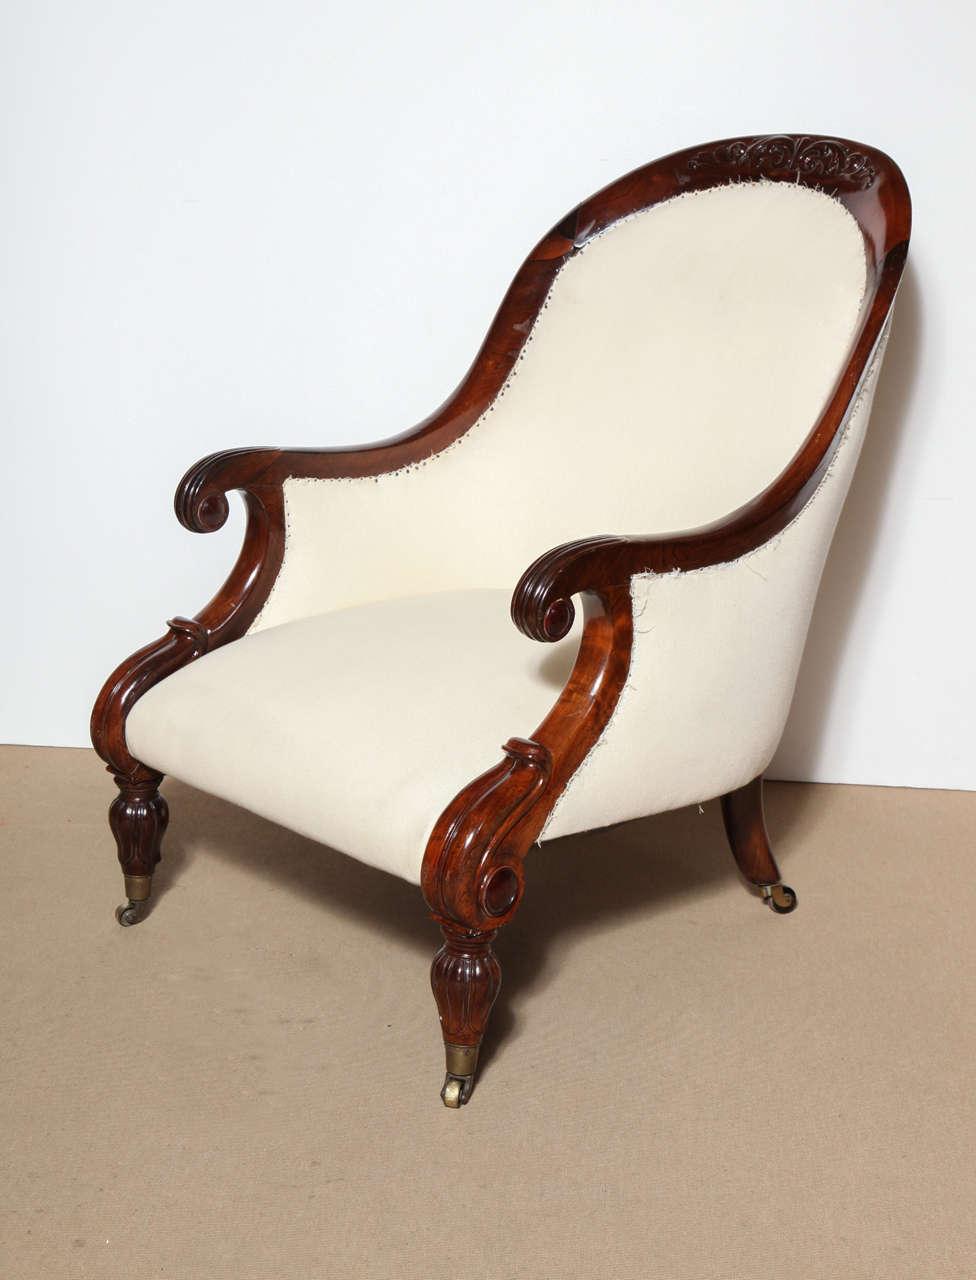 19th Century English, Goncalo Alves Armchair Covered in Muslin